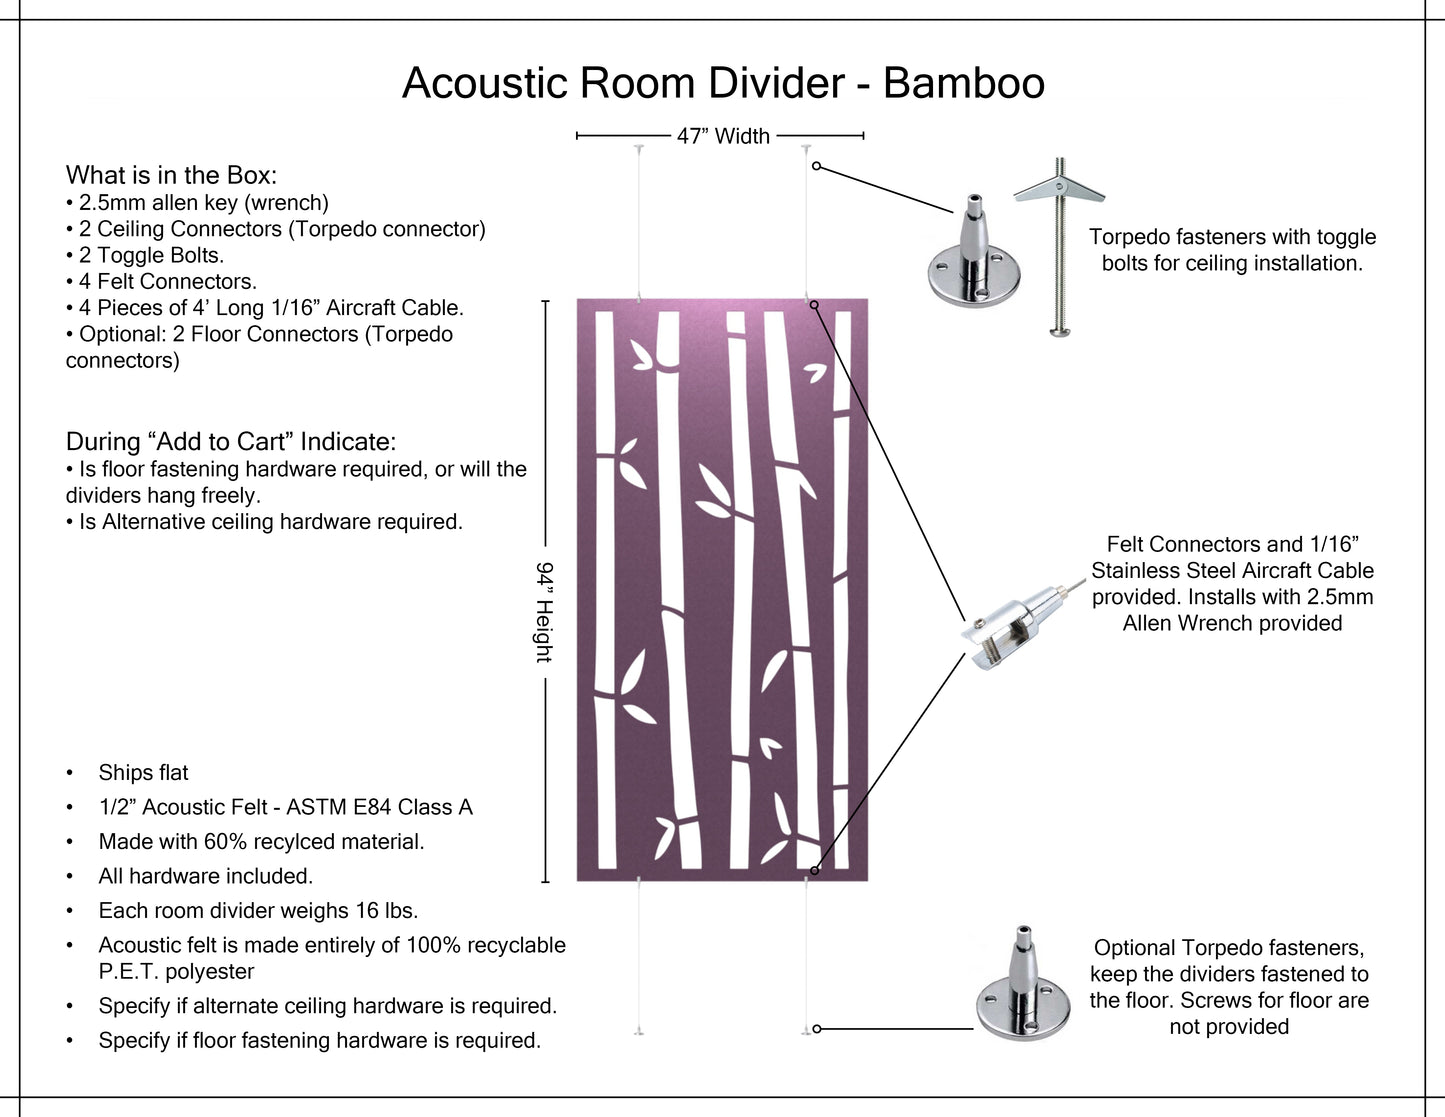 4x8 Acoustic Room Divider - Bamboo